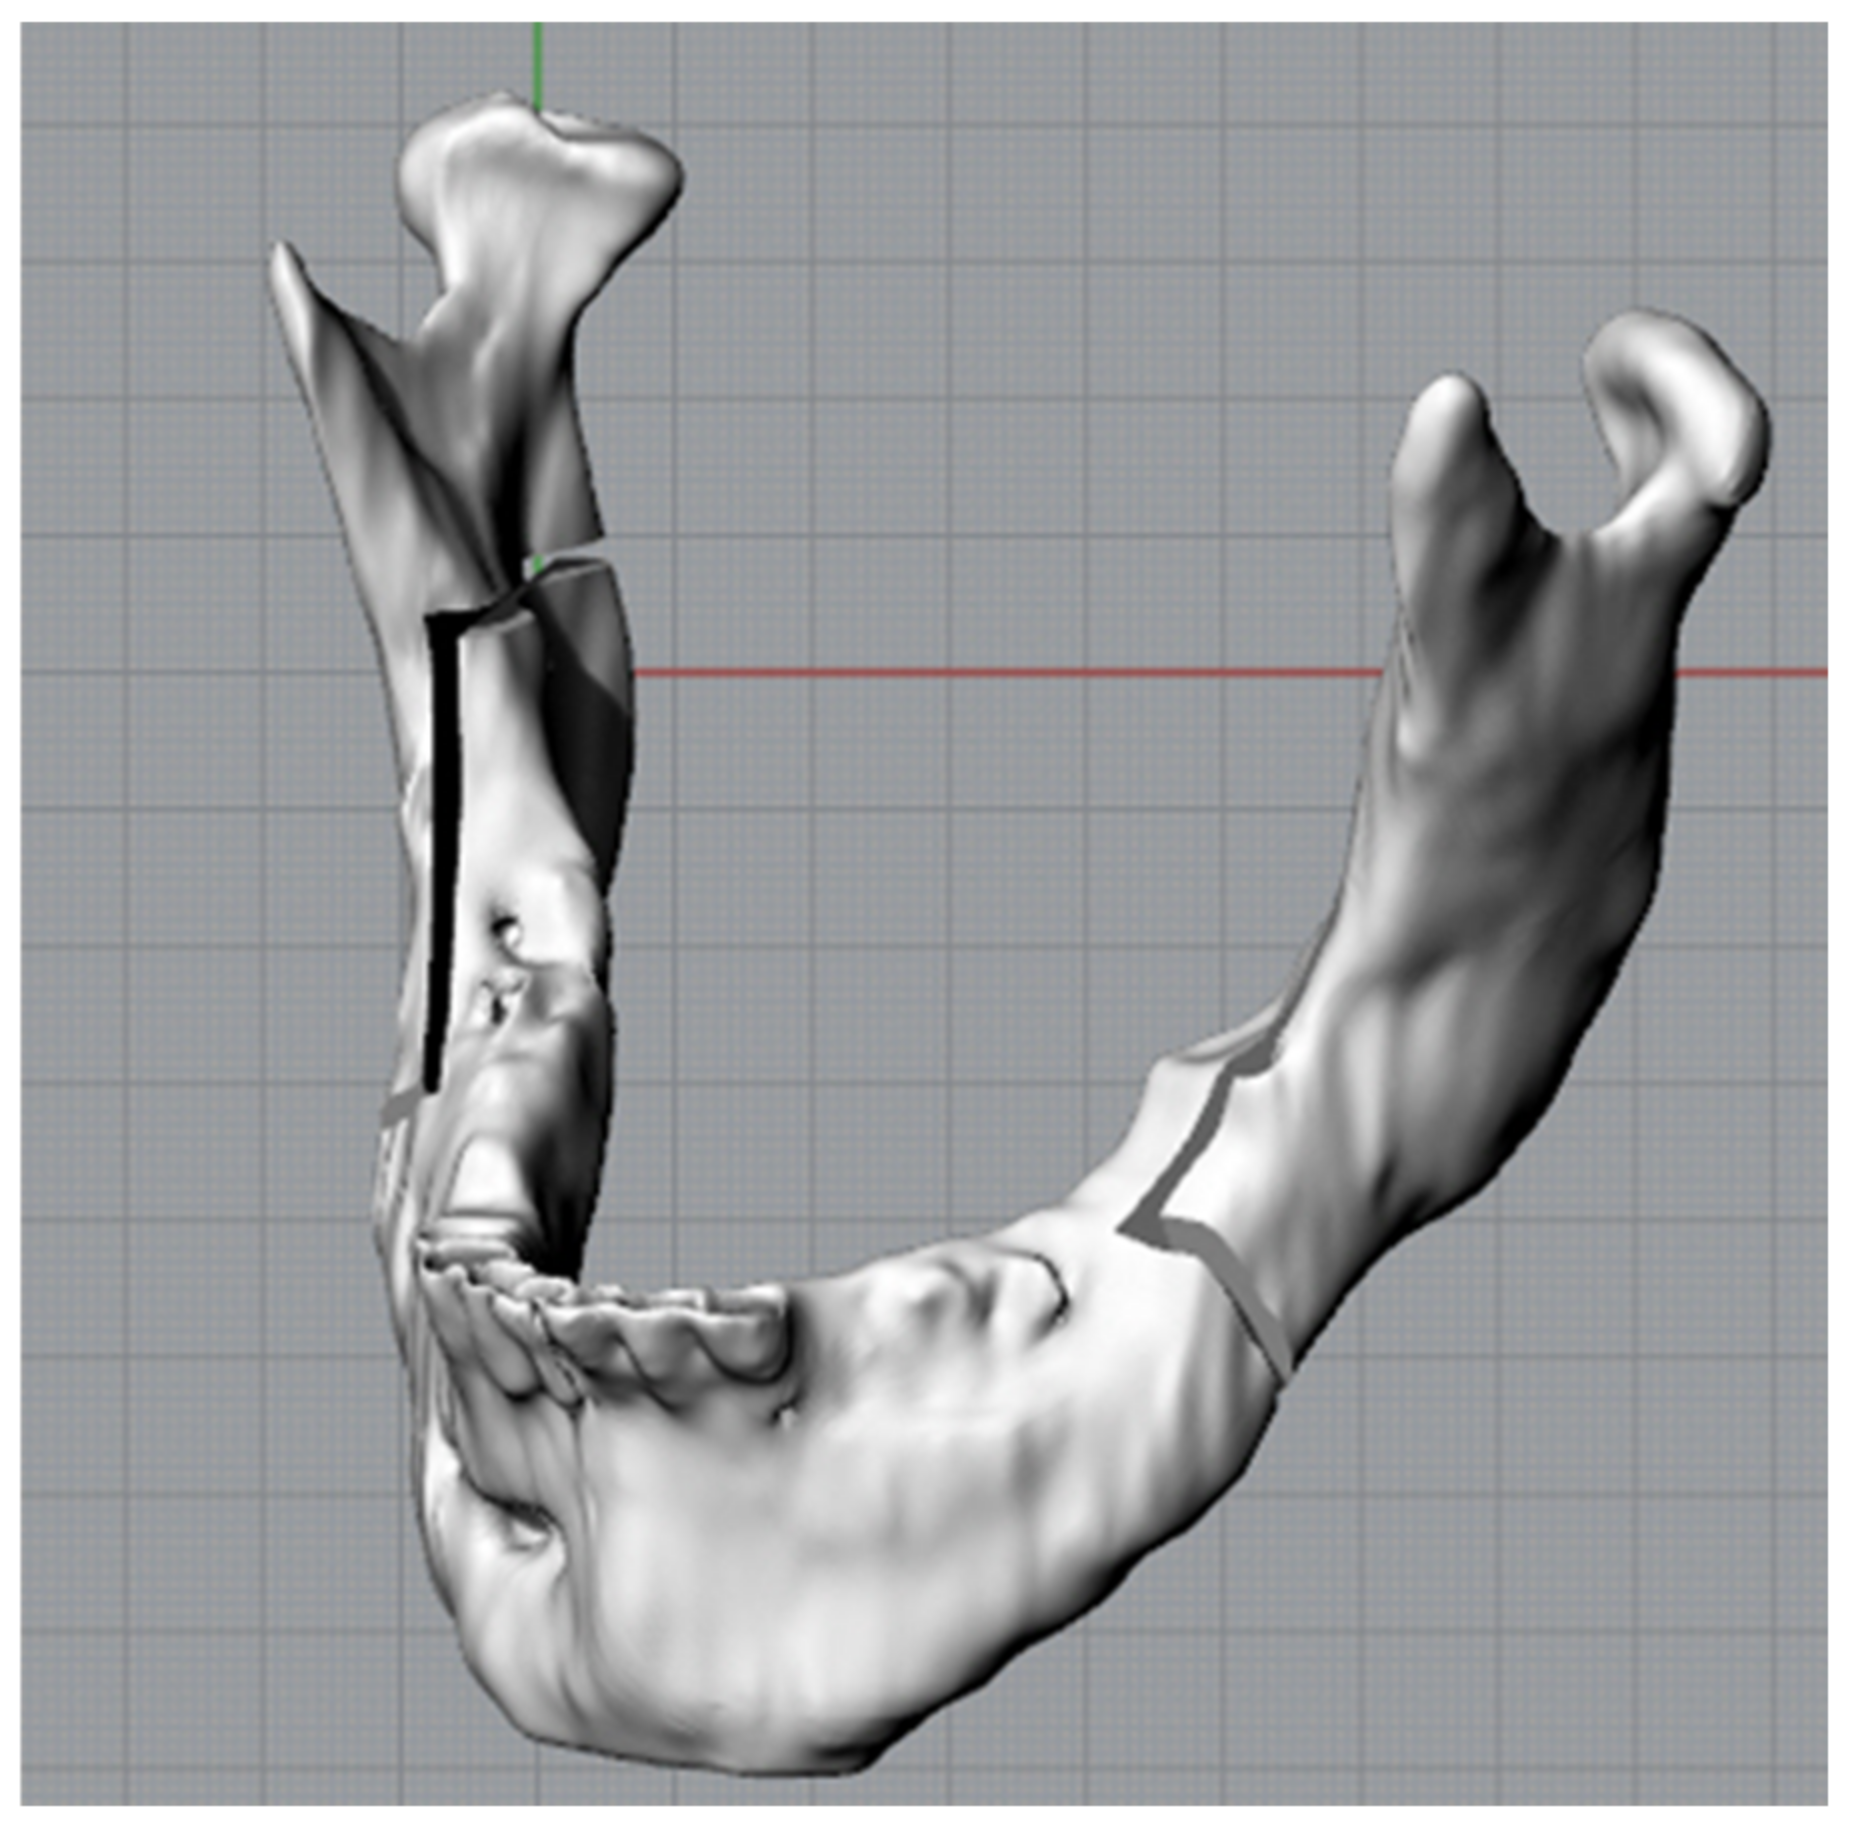 Applied Sciences | Free Full-Text | Computer Aided Orthognathic Surgery: A  General Method for Designing and Manufacturing Personalized  Cutting/Repositioning Templates | HTML